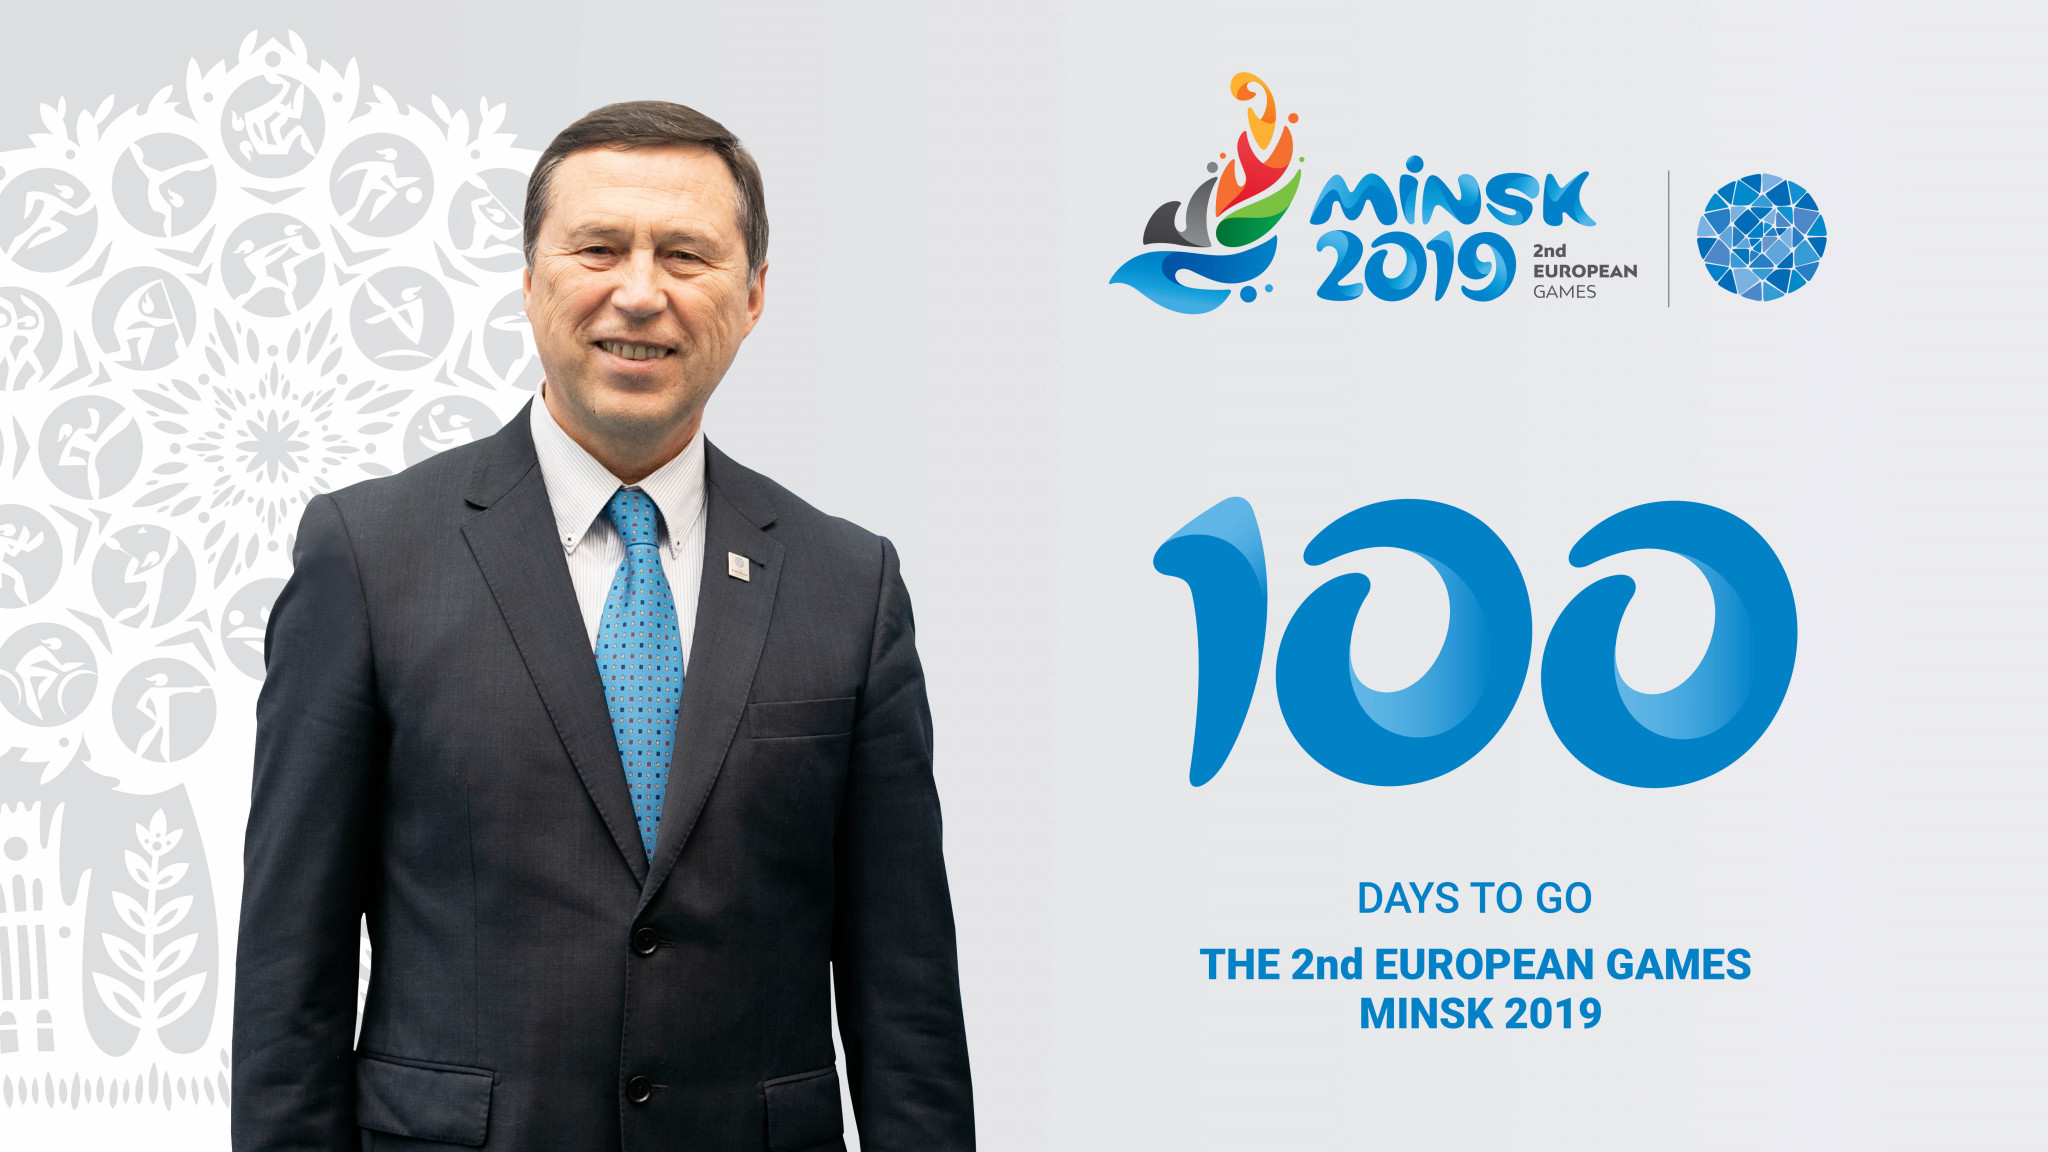 Minsk 2019 mark 100 days to go before second European Games